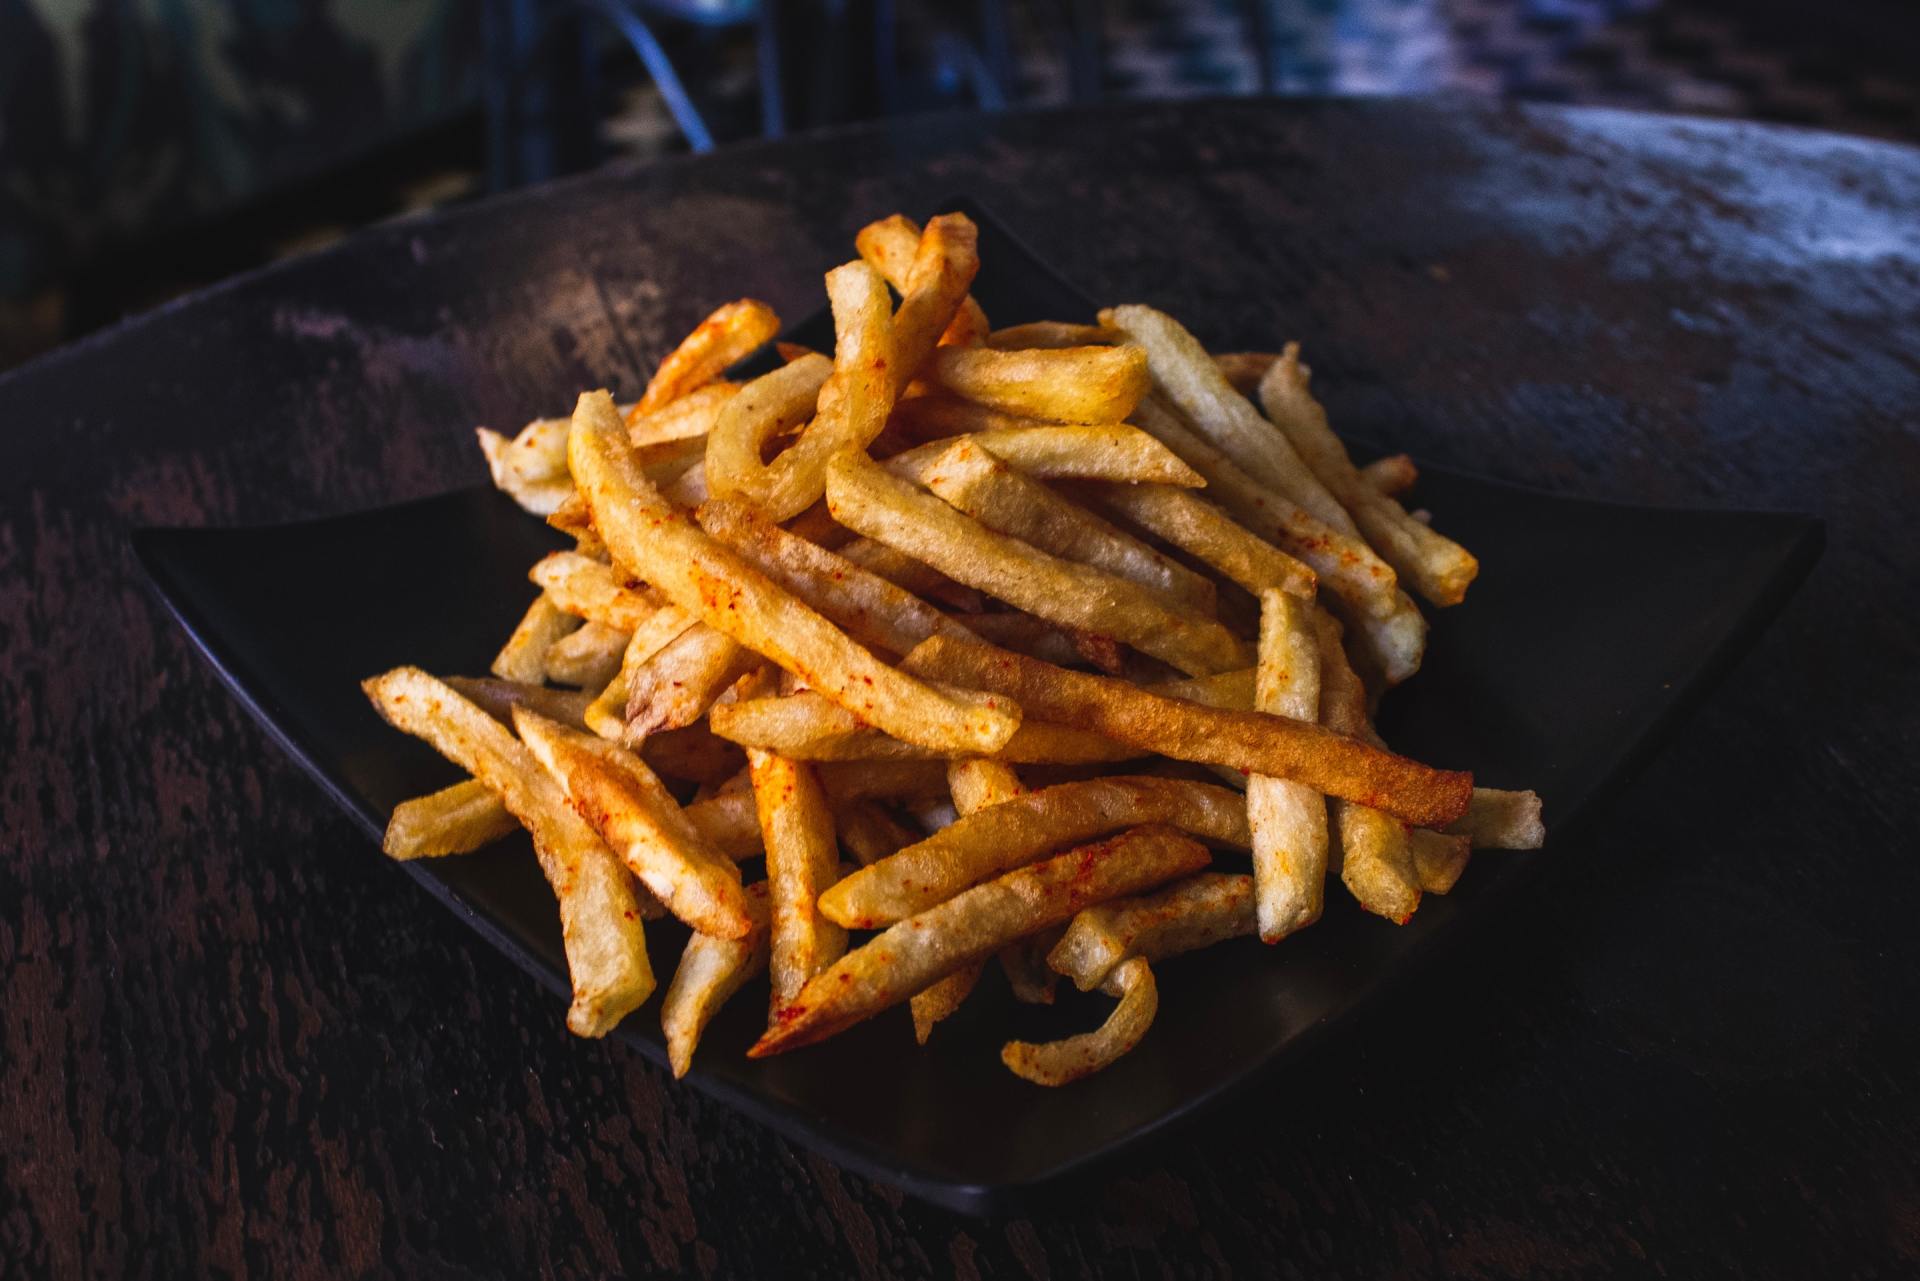 Celebrate The Potato This National French Fry Day